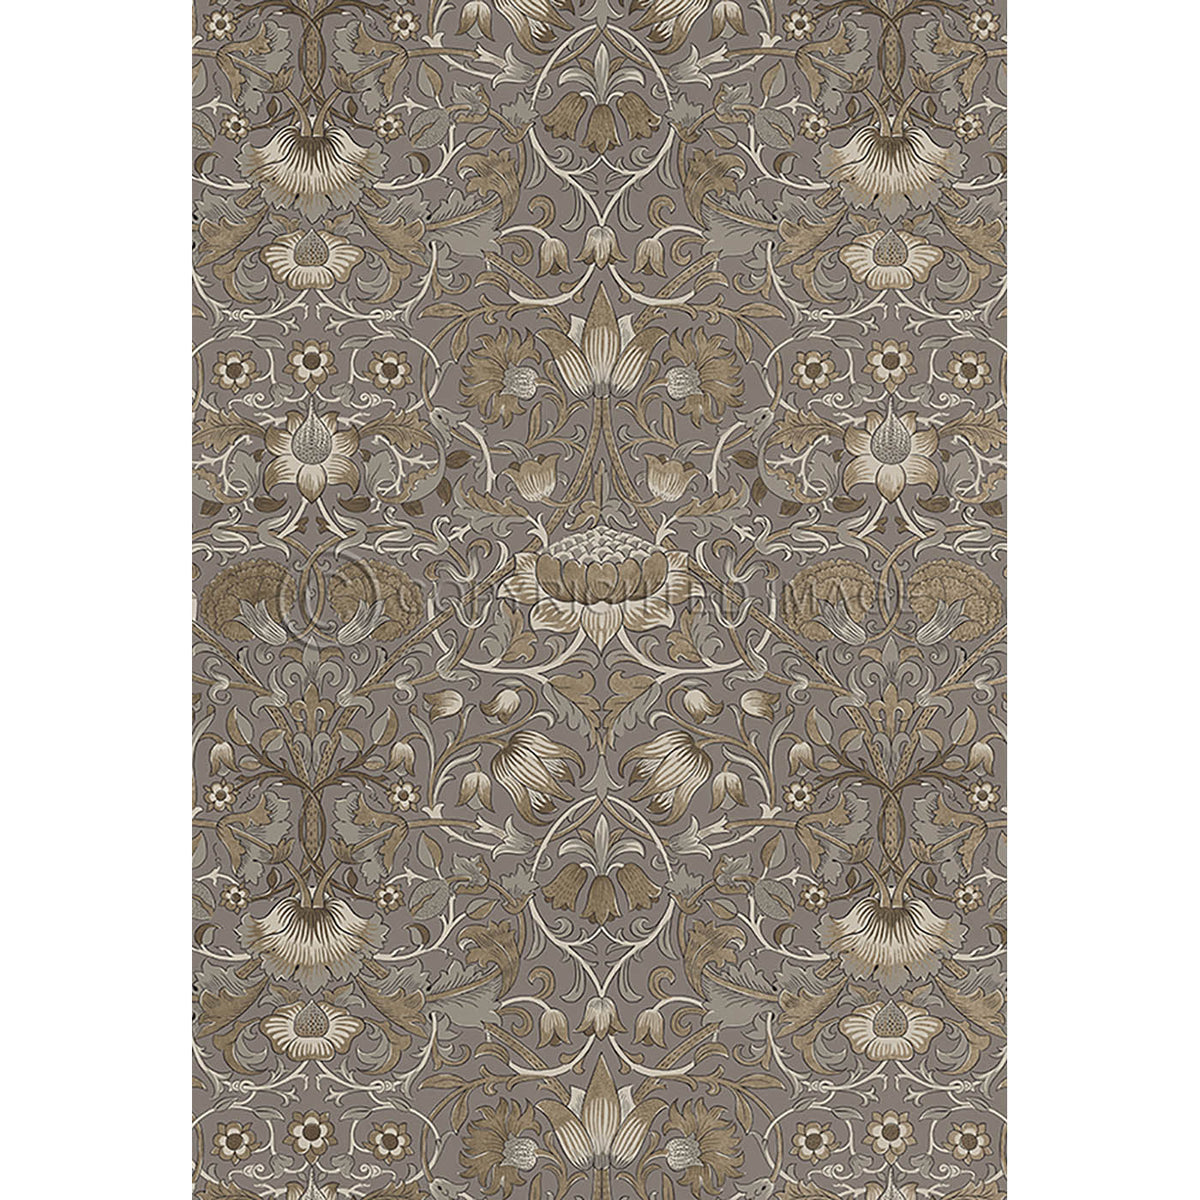 Lodden Taupe and Gold 38x56